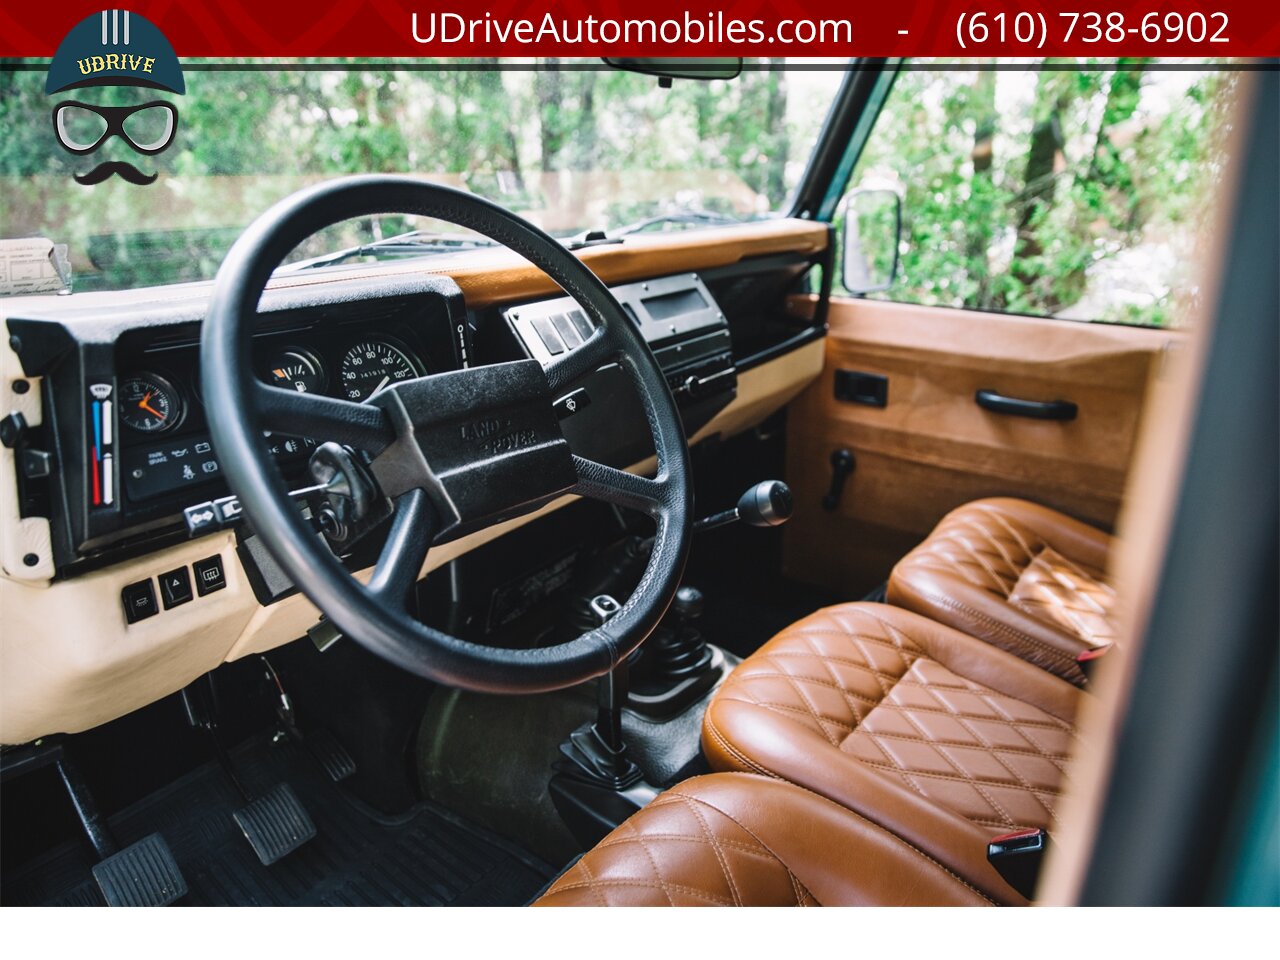 1986 Land Rover Defender 90 D90 4.0L V8 5 Speed Manual New Interior  $25k Recent Engine Build - Photo 5 - West Chester, PA 19382